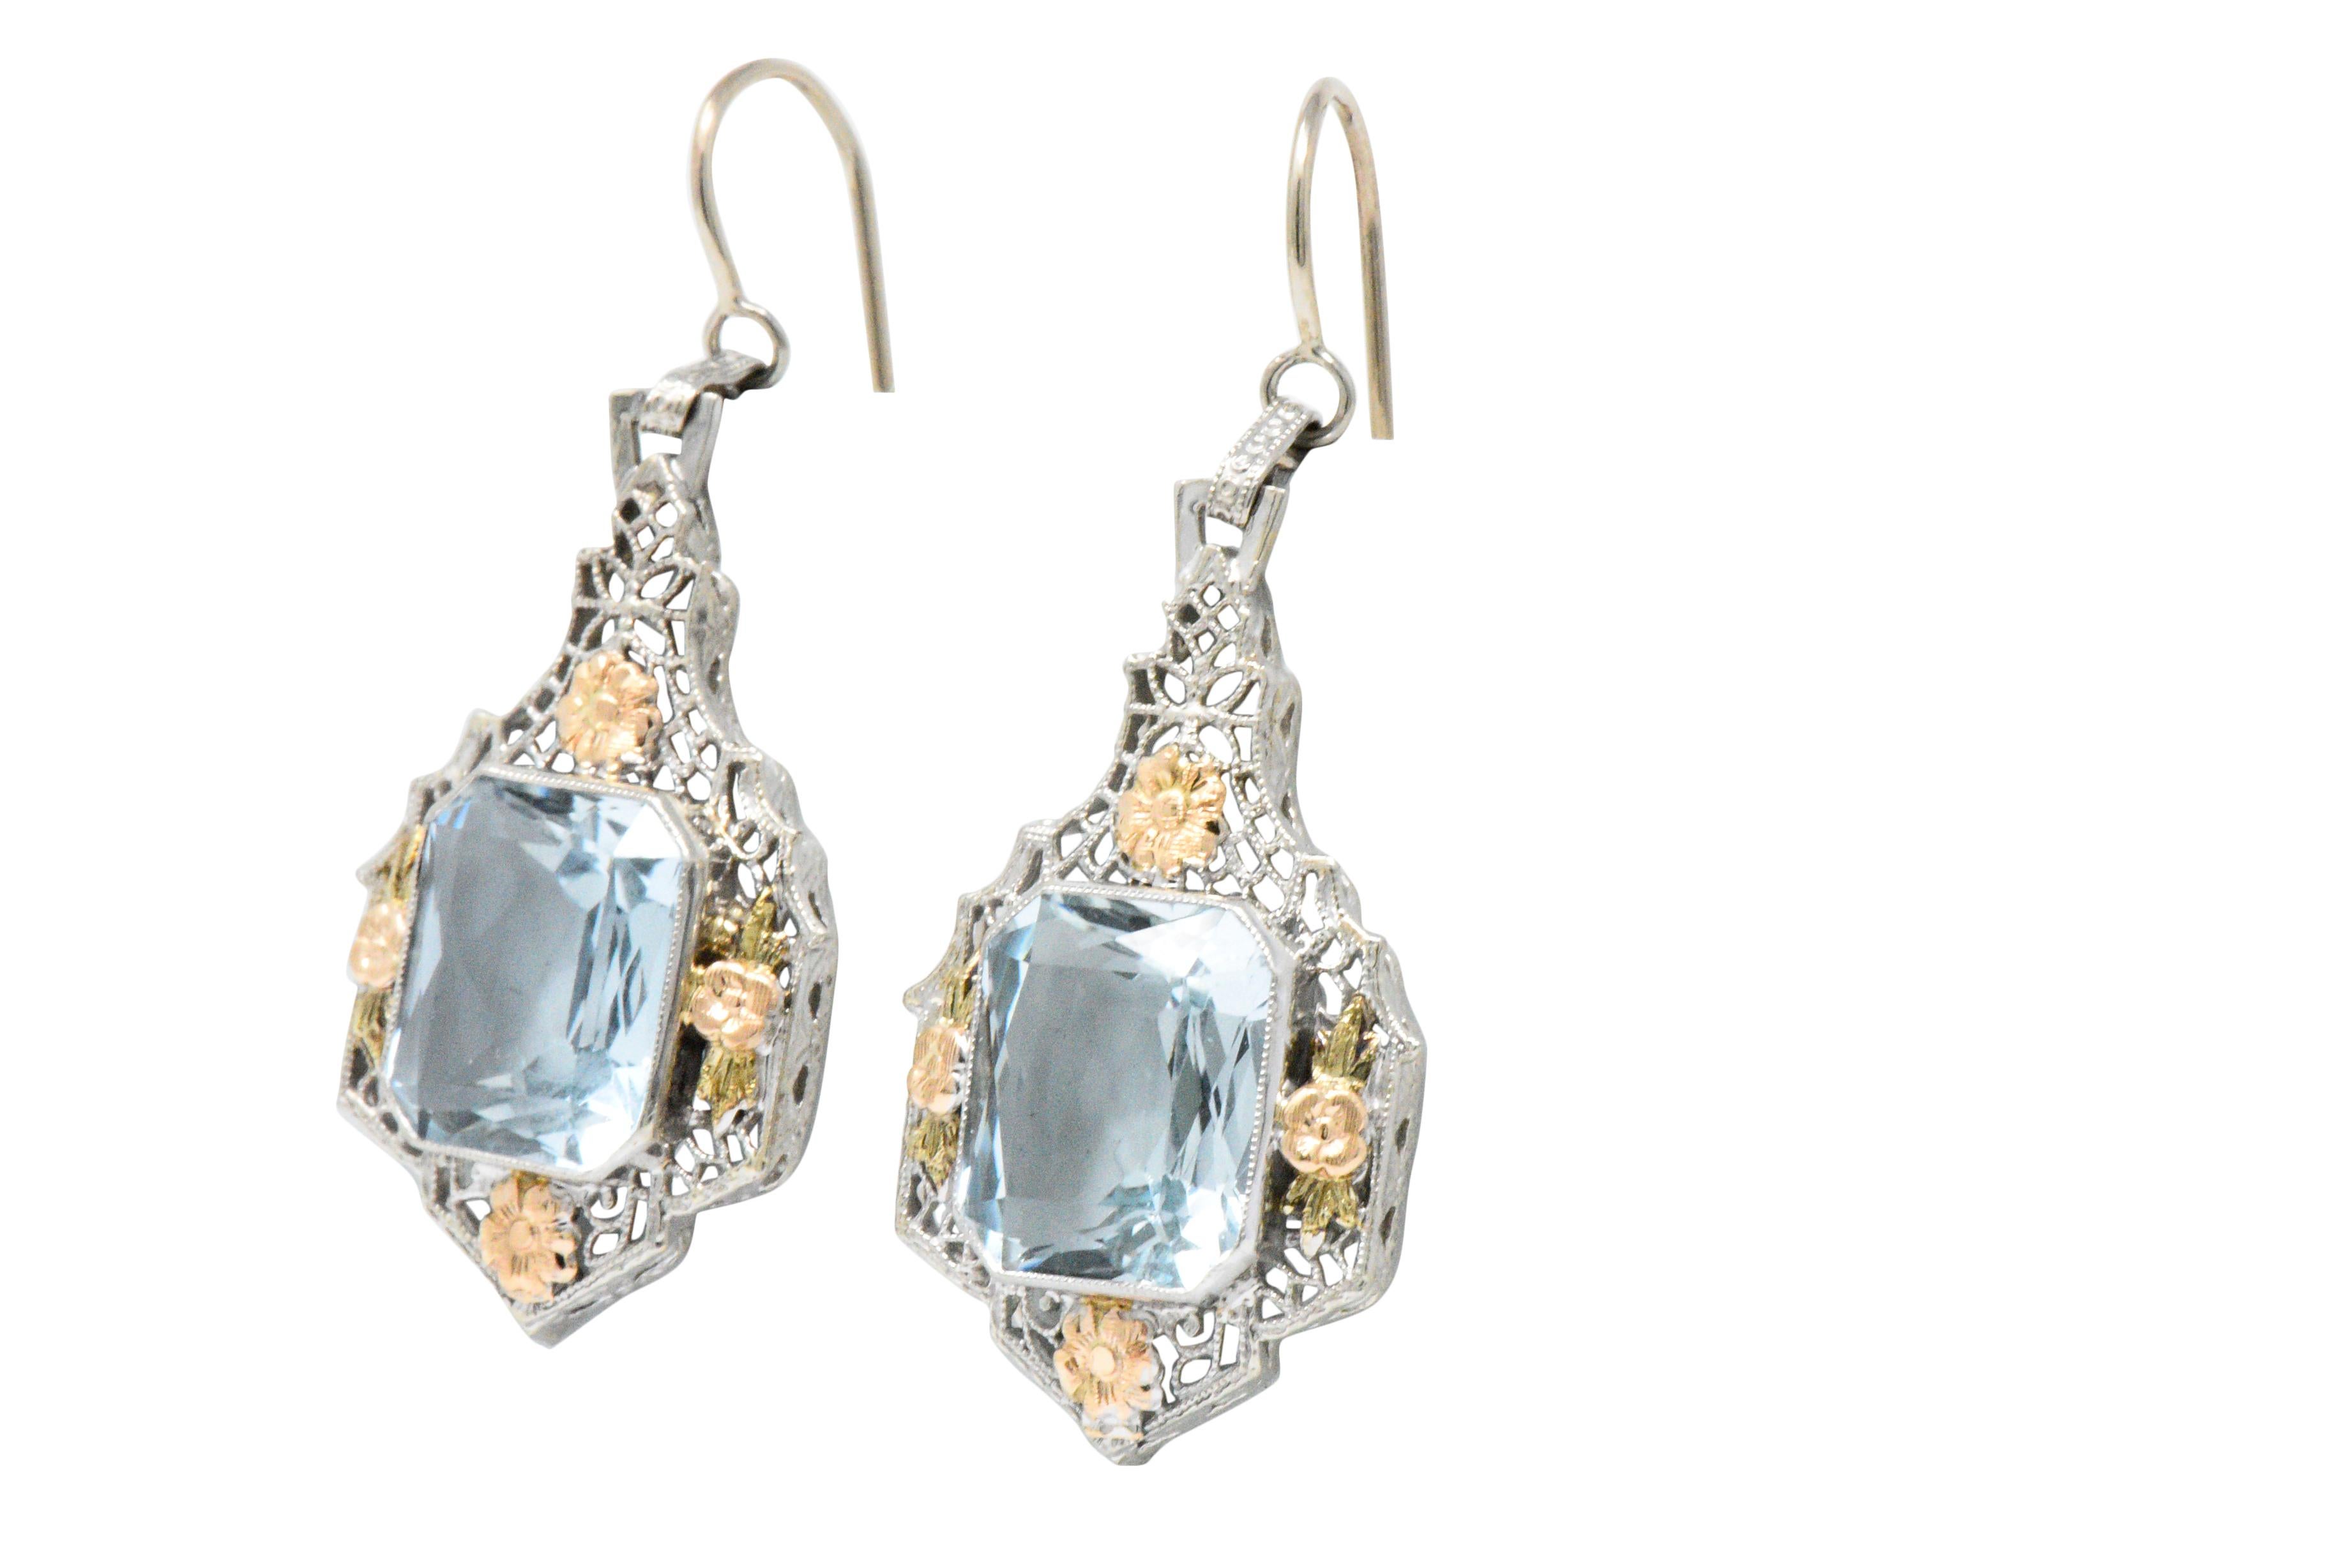 Each centering a cut-corner rectangular brilliant cut aquamarine, approximately 9.00 carats total, bright light blue, very well matches

The aquas are bezel set and accented by rose gold flowers with green gold leaves in a pierced millegrain white